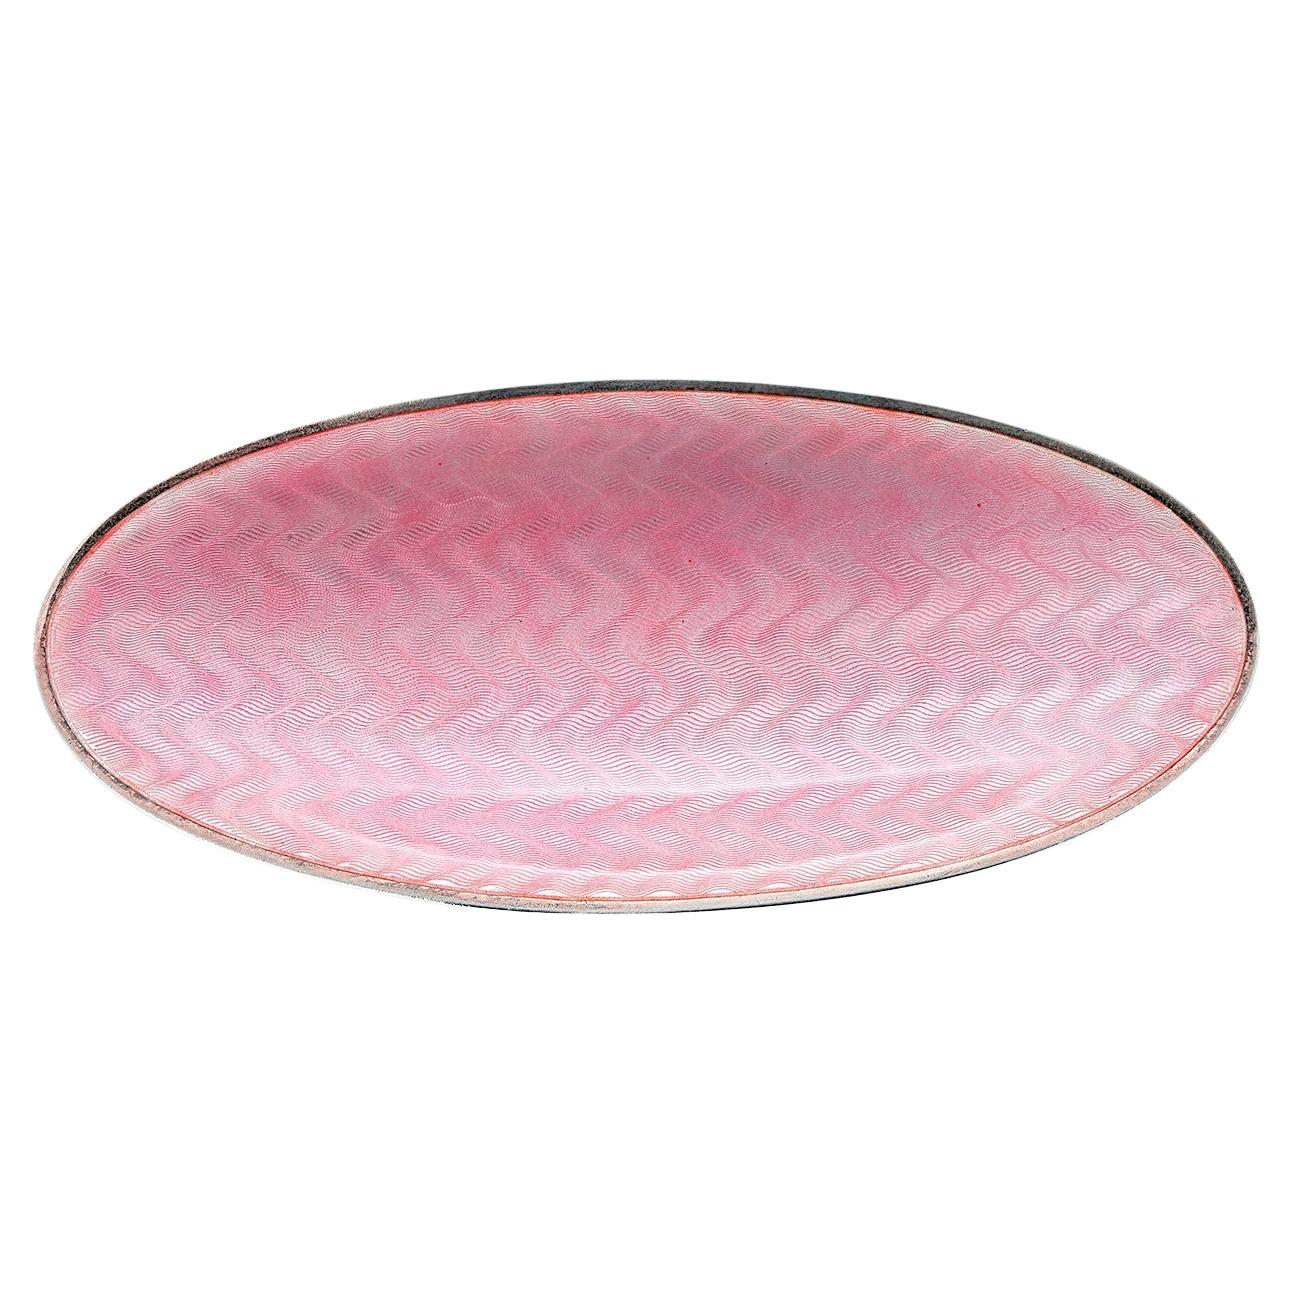 Vintage Sterling Silver Guilloché Translucent Pink Enameled Oval Footed Pin Tray